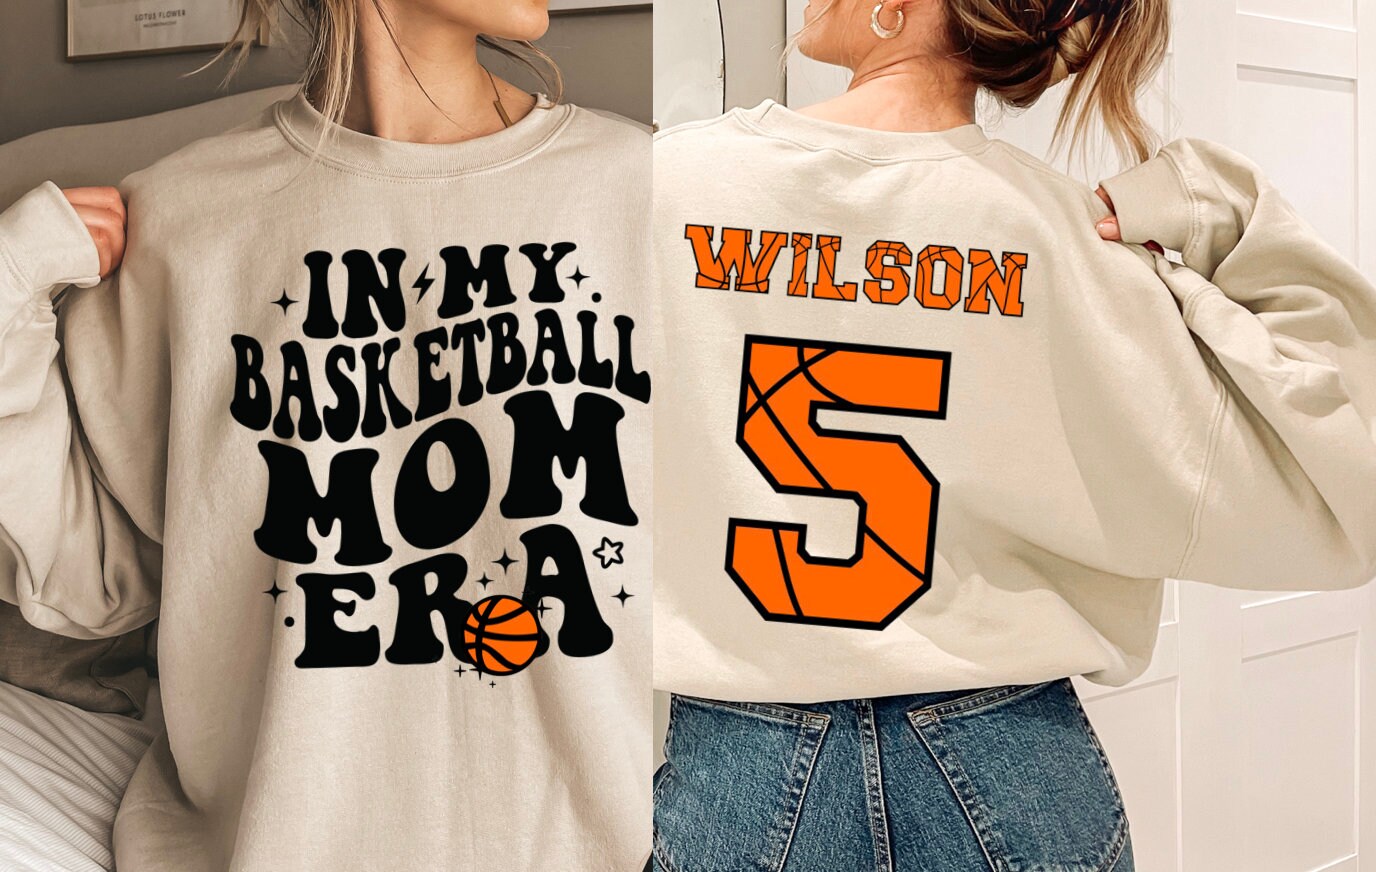 BASKETBALL DESIGN TEMPLATES for T-shirts, Hoodies and More!